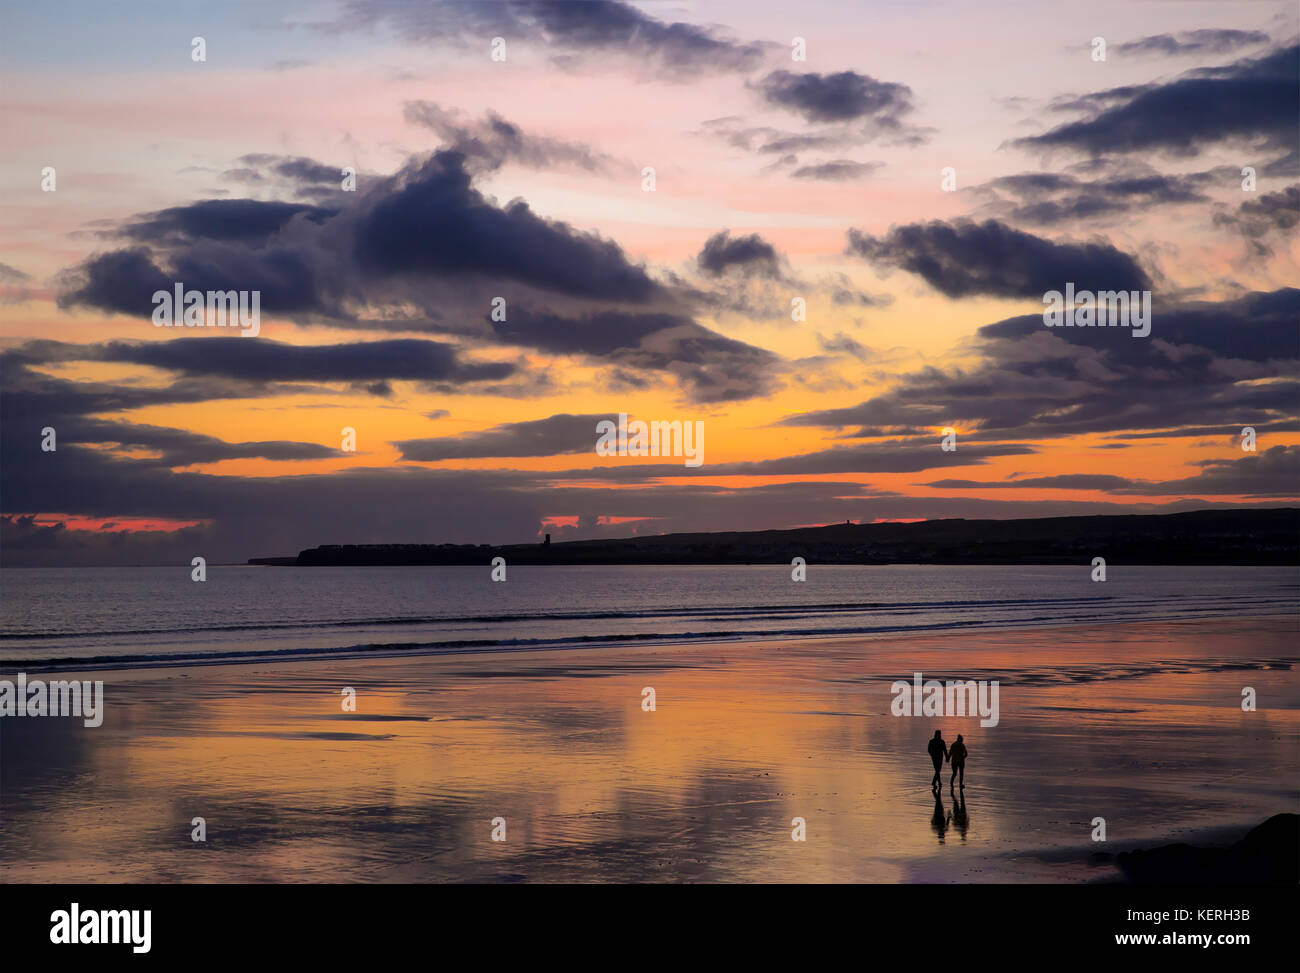 this was a beautiful setting for this couple to take a long romantic walk on the beach at sunset , a great way to end the day..... Stock Photo